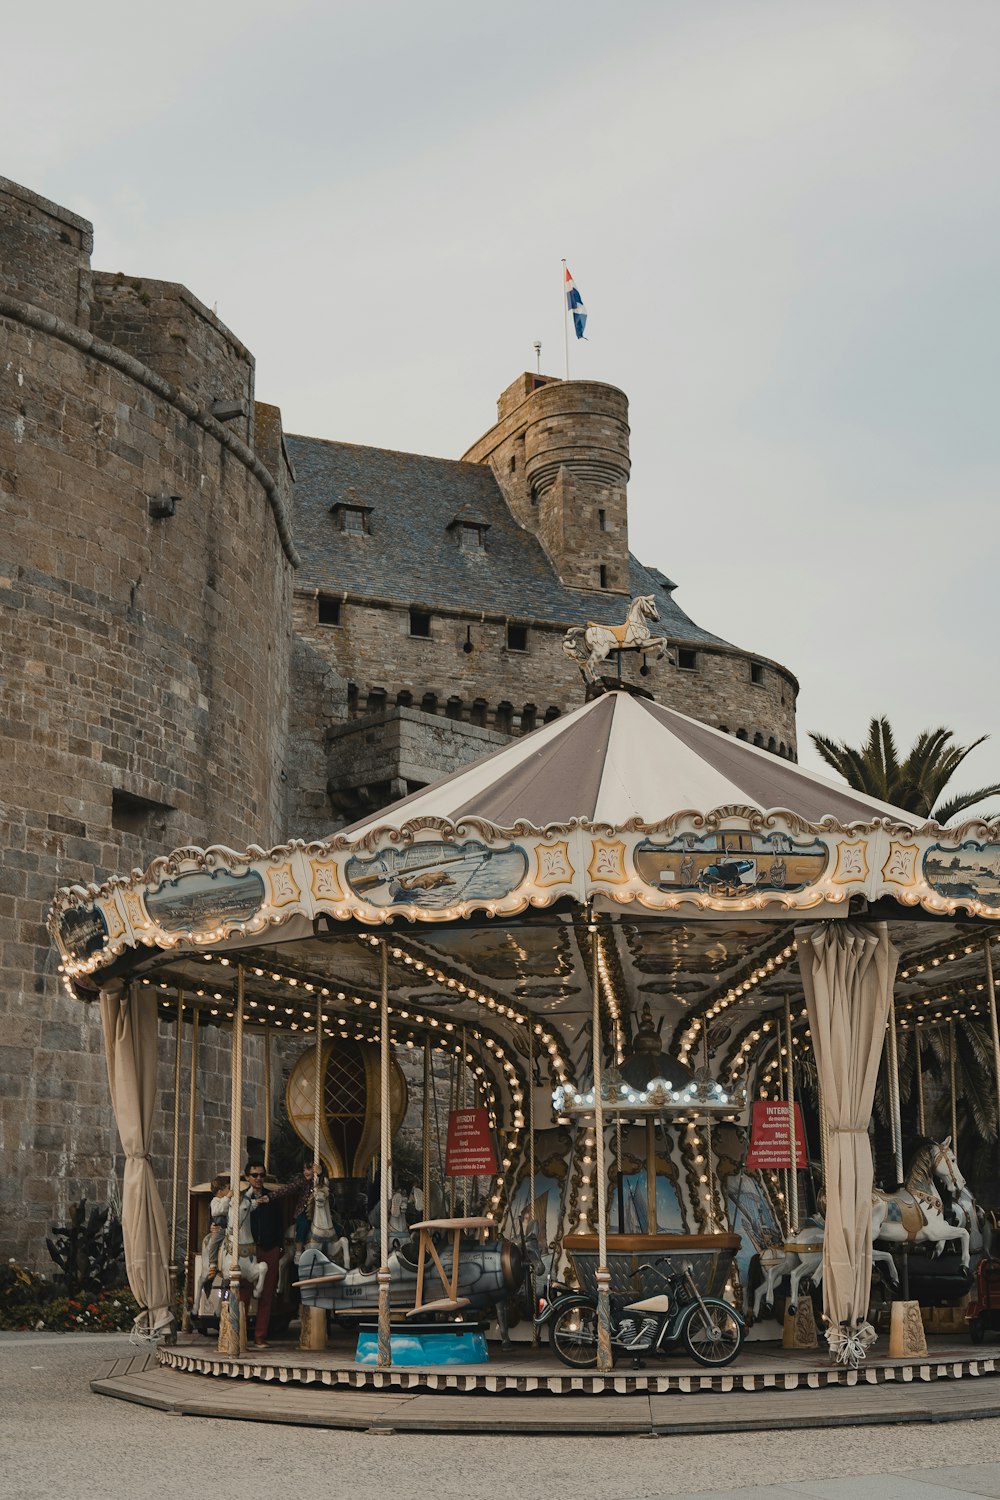 a merry go round in front of a castle